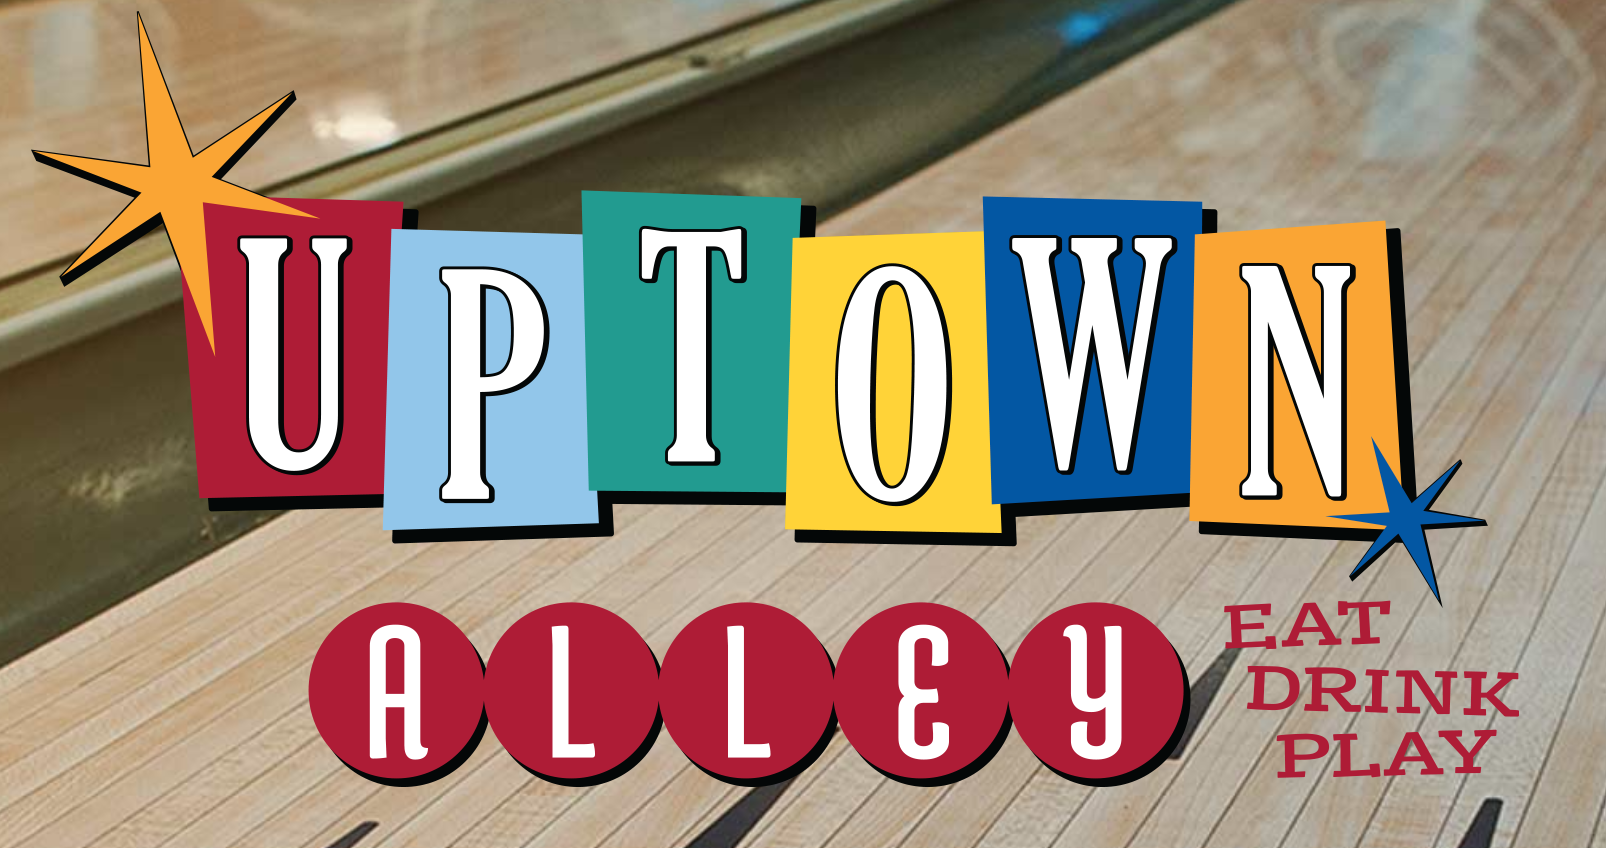 The logo for Uptown Alley. The design features a colorful and playful logo with each letter of "UPTOWN" displayed in individual squares of different colors: red, blue, teal, yellow, and orange. The letters are in white, bold, and stylized font. The word "ALLEY" is written below "UPTOWN" in white letters inside red circles. To the right of "ALLEY," the words "EAT DRINK PLAY" are displayed in red.